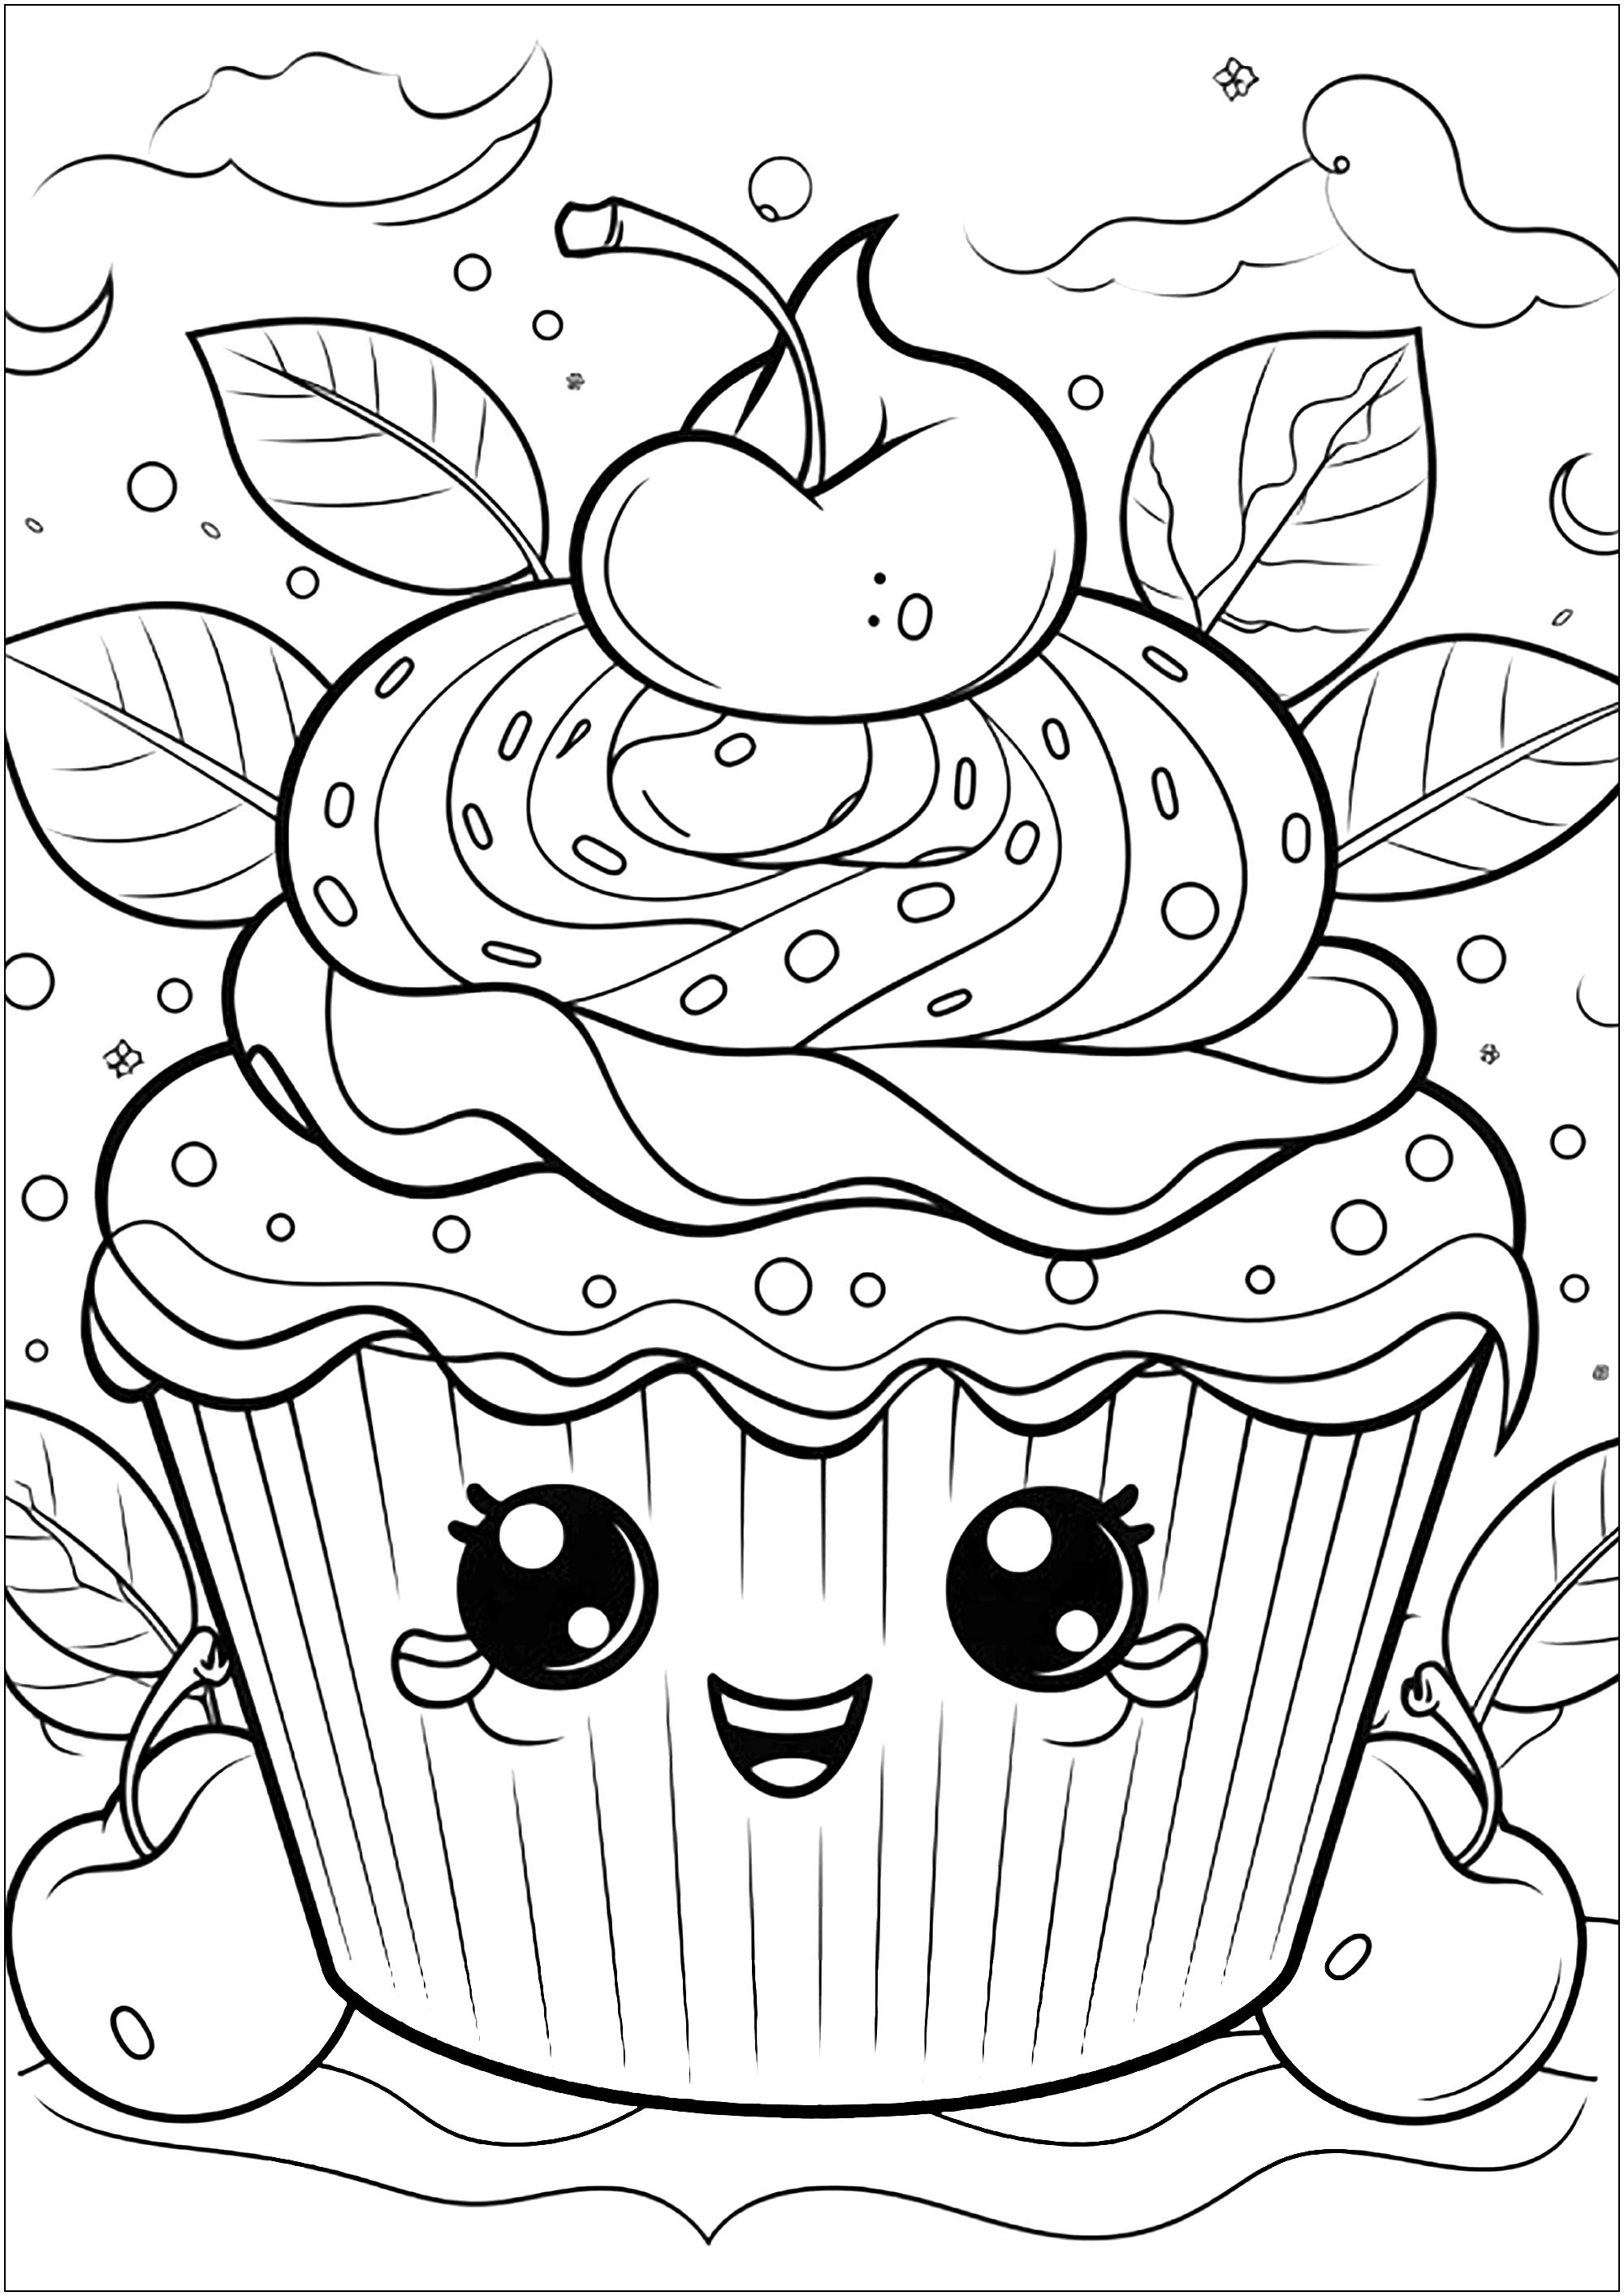 Cupcake Drawing Tutorial for Kids - Instructables